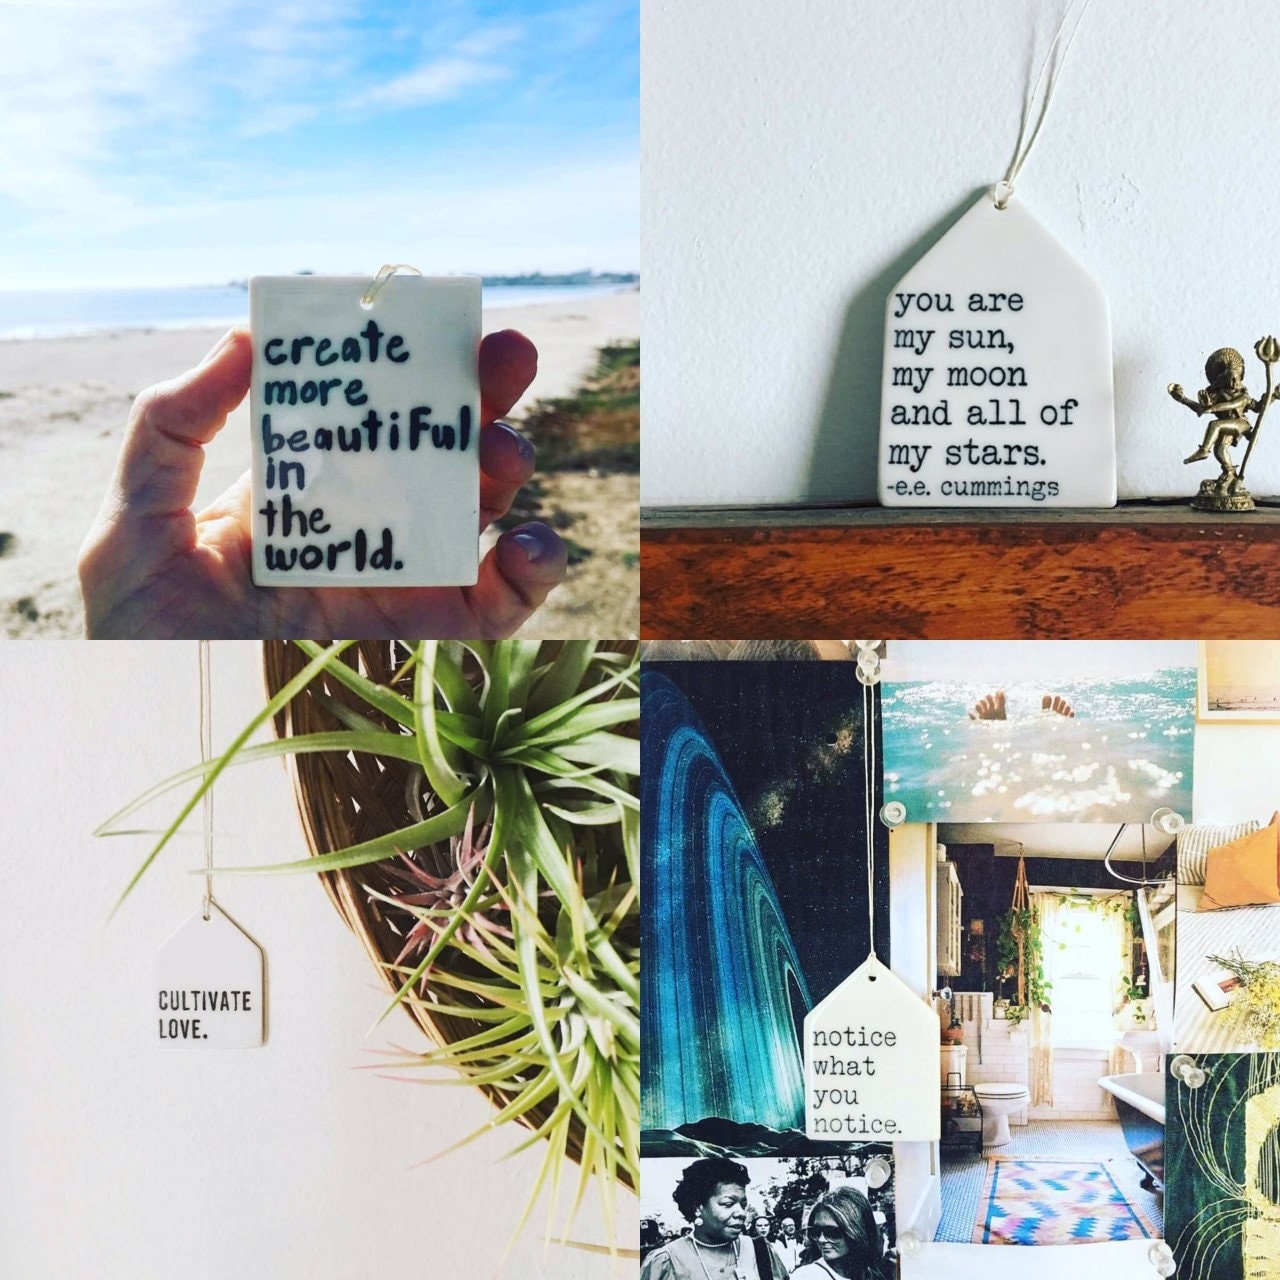 what do you love about this present moment | ceramic wall tag | ceramic wall tile | screenprinted ceramics | meditation | be here now | yoga